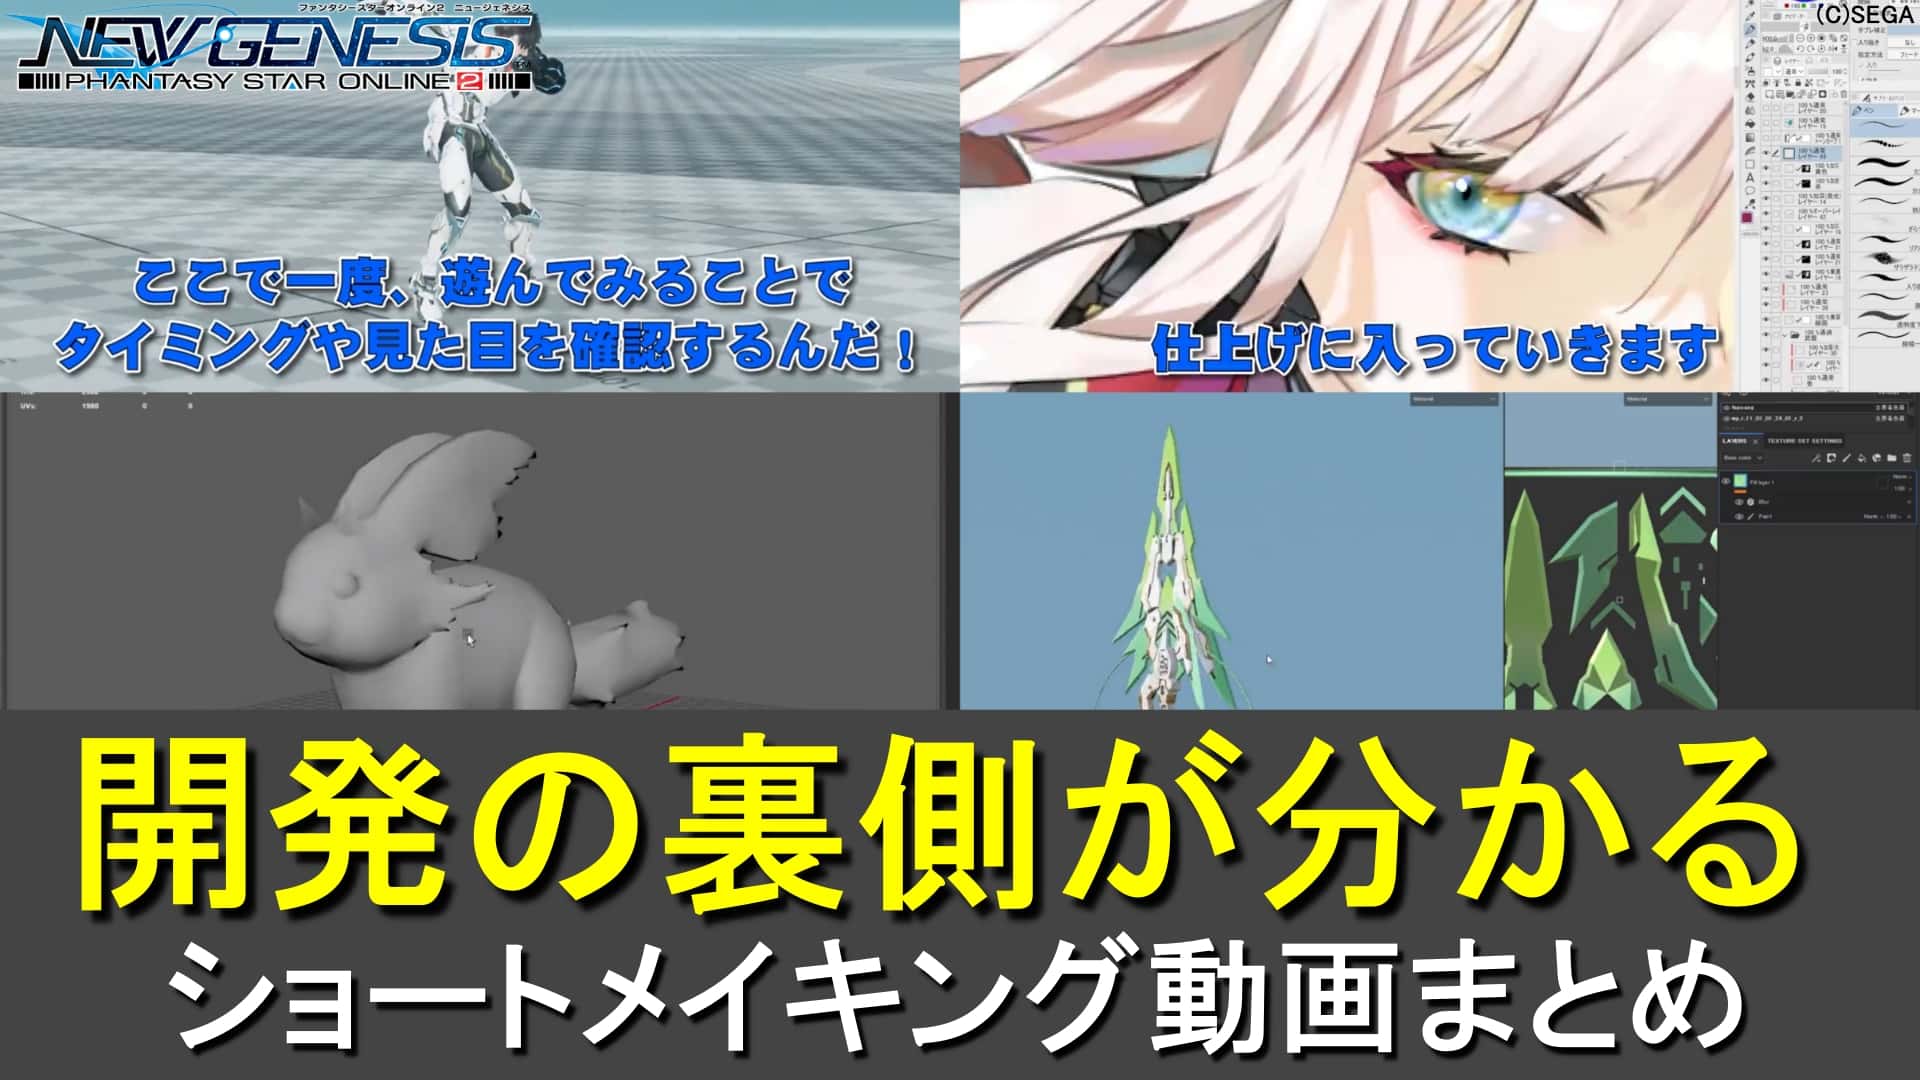 【PSO2NGS】開発の裏側が分かるショートメイキング動画まとめ